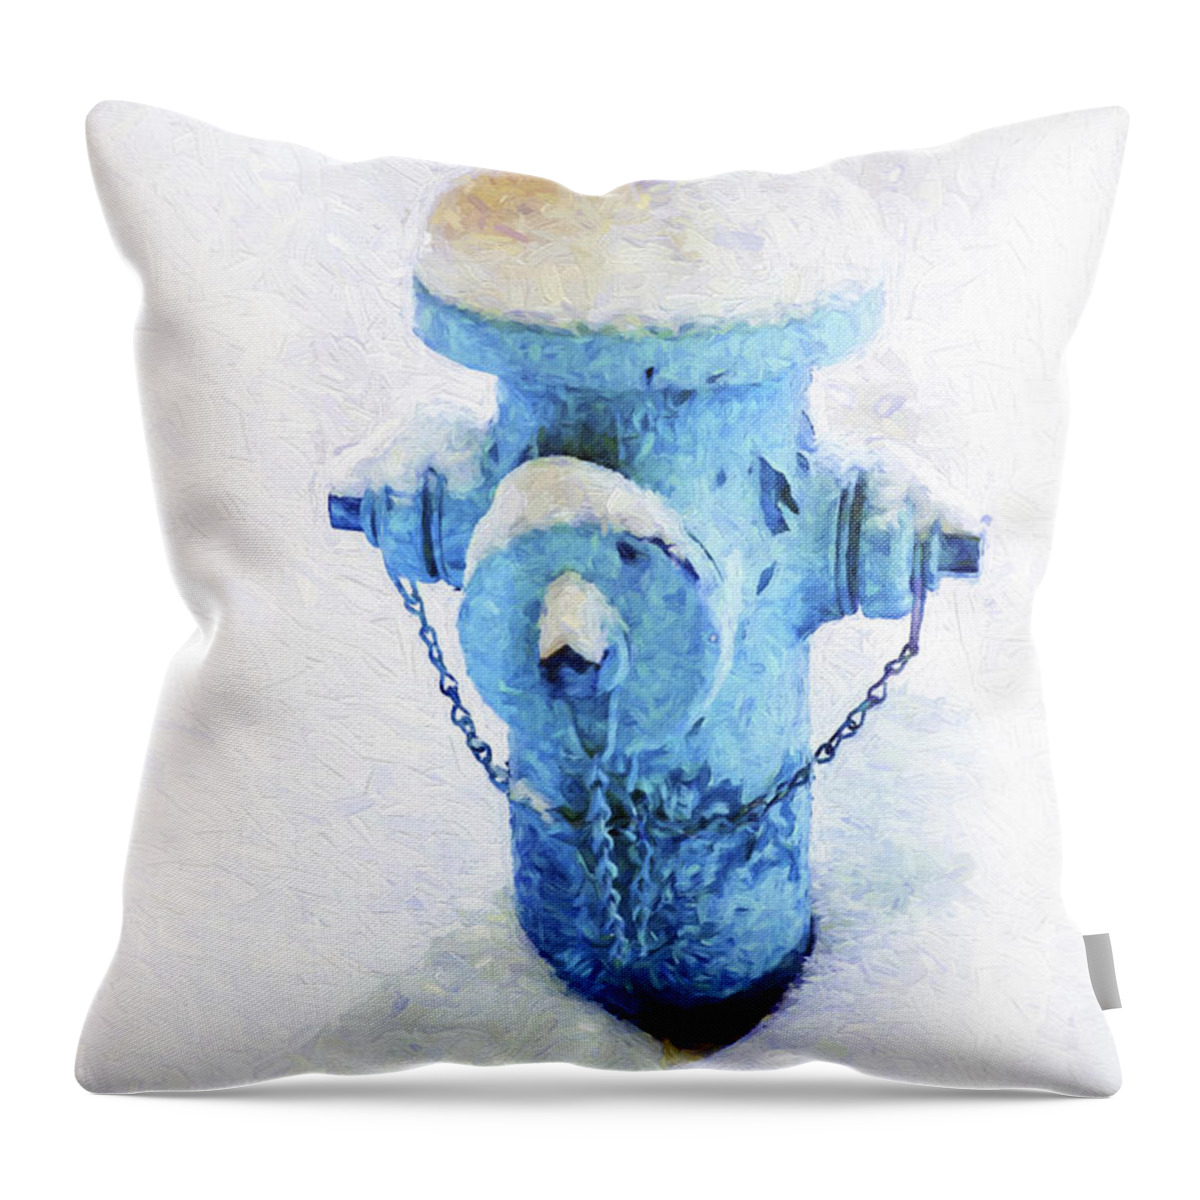 Andee Design Fire Hydrant Throw Pillow featuring the photograph Frozen Blue Fire Hydrant by Andee Design